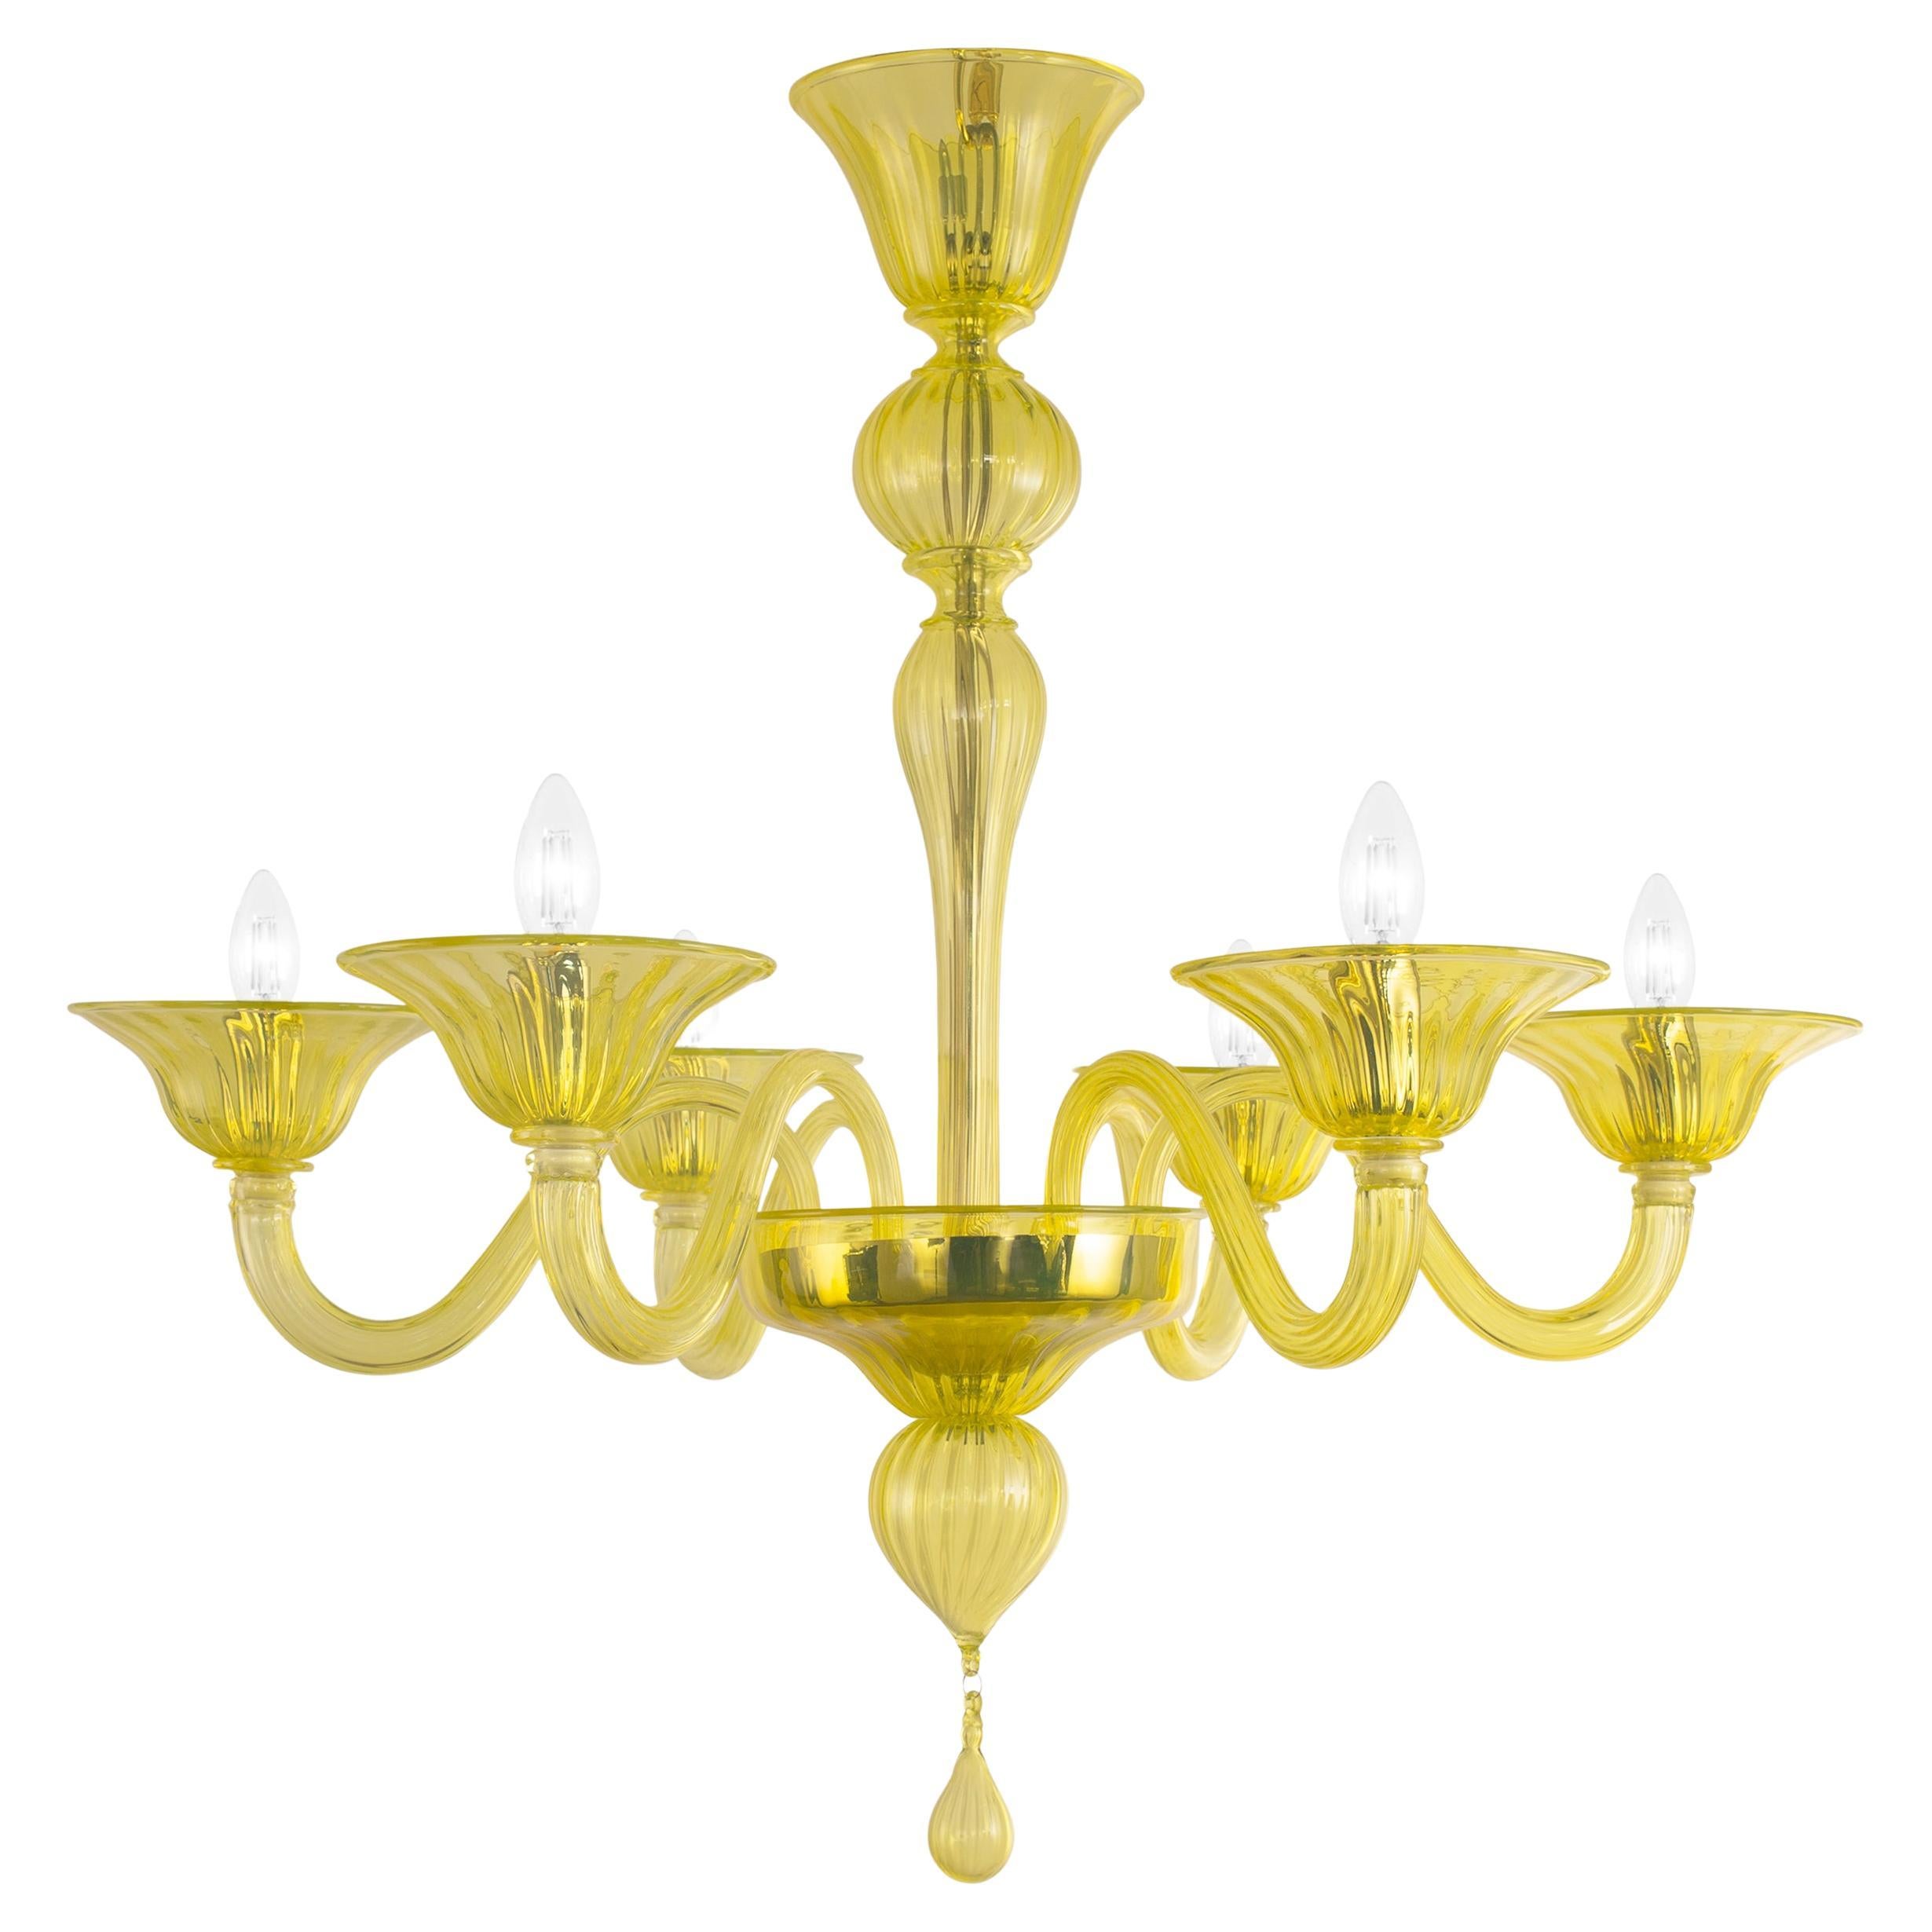 Simplicissimus Chandelier, 6 lights, Yellow Murano Glass by Multiforme